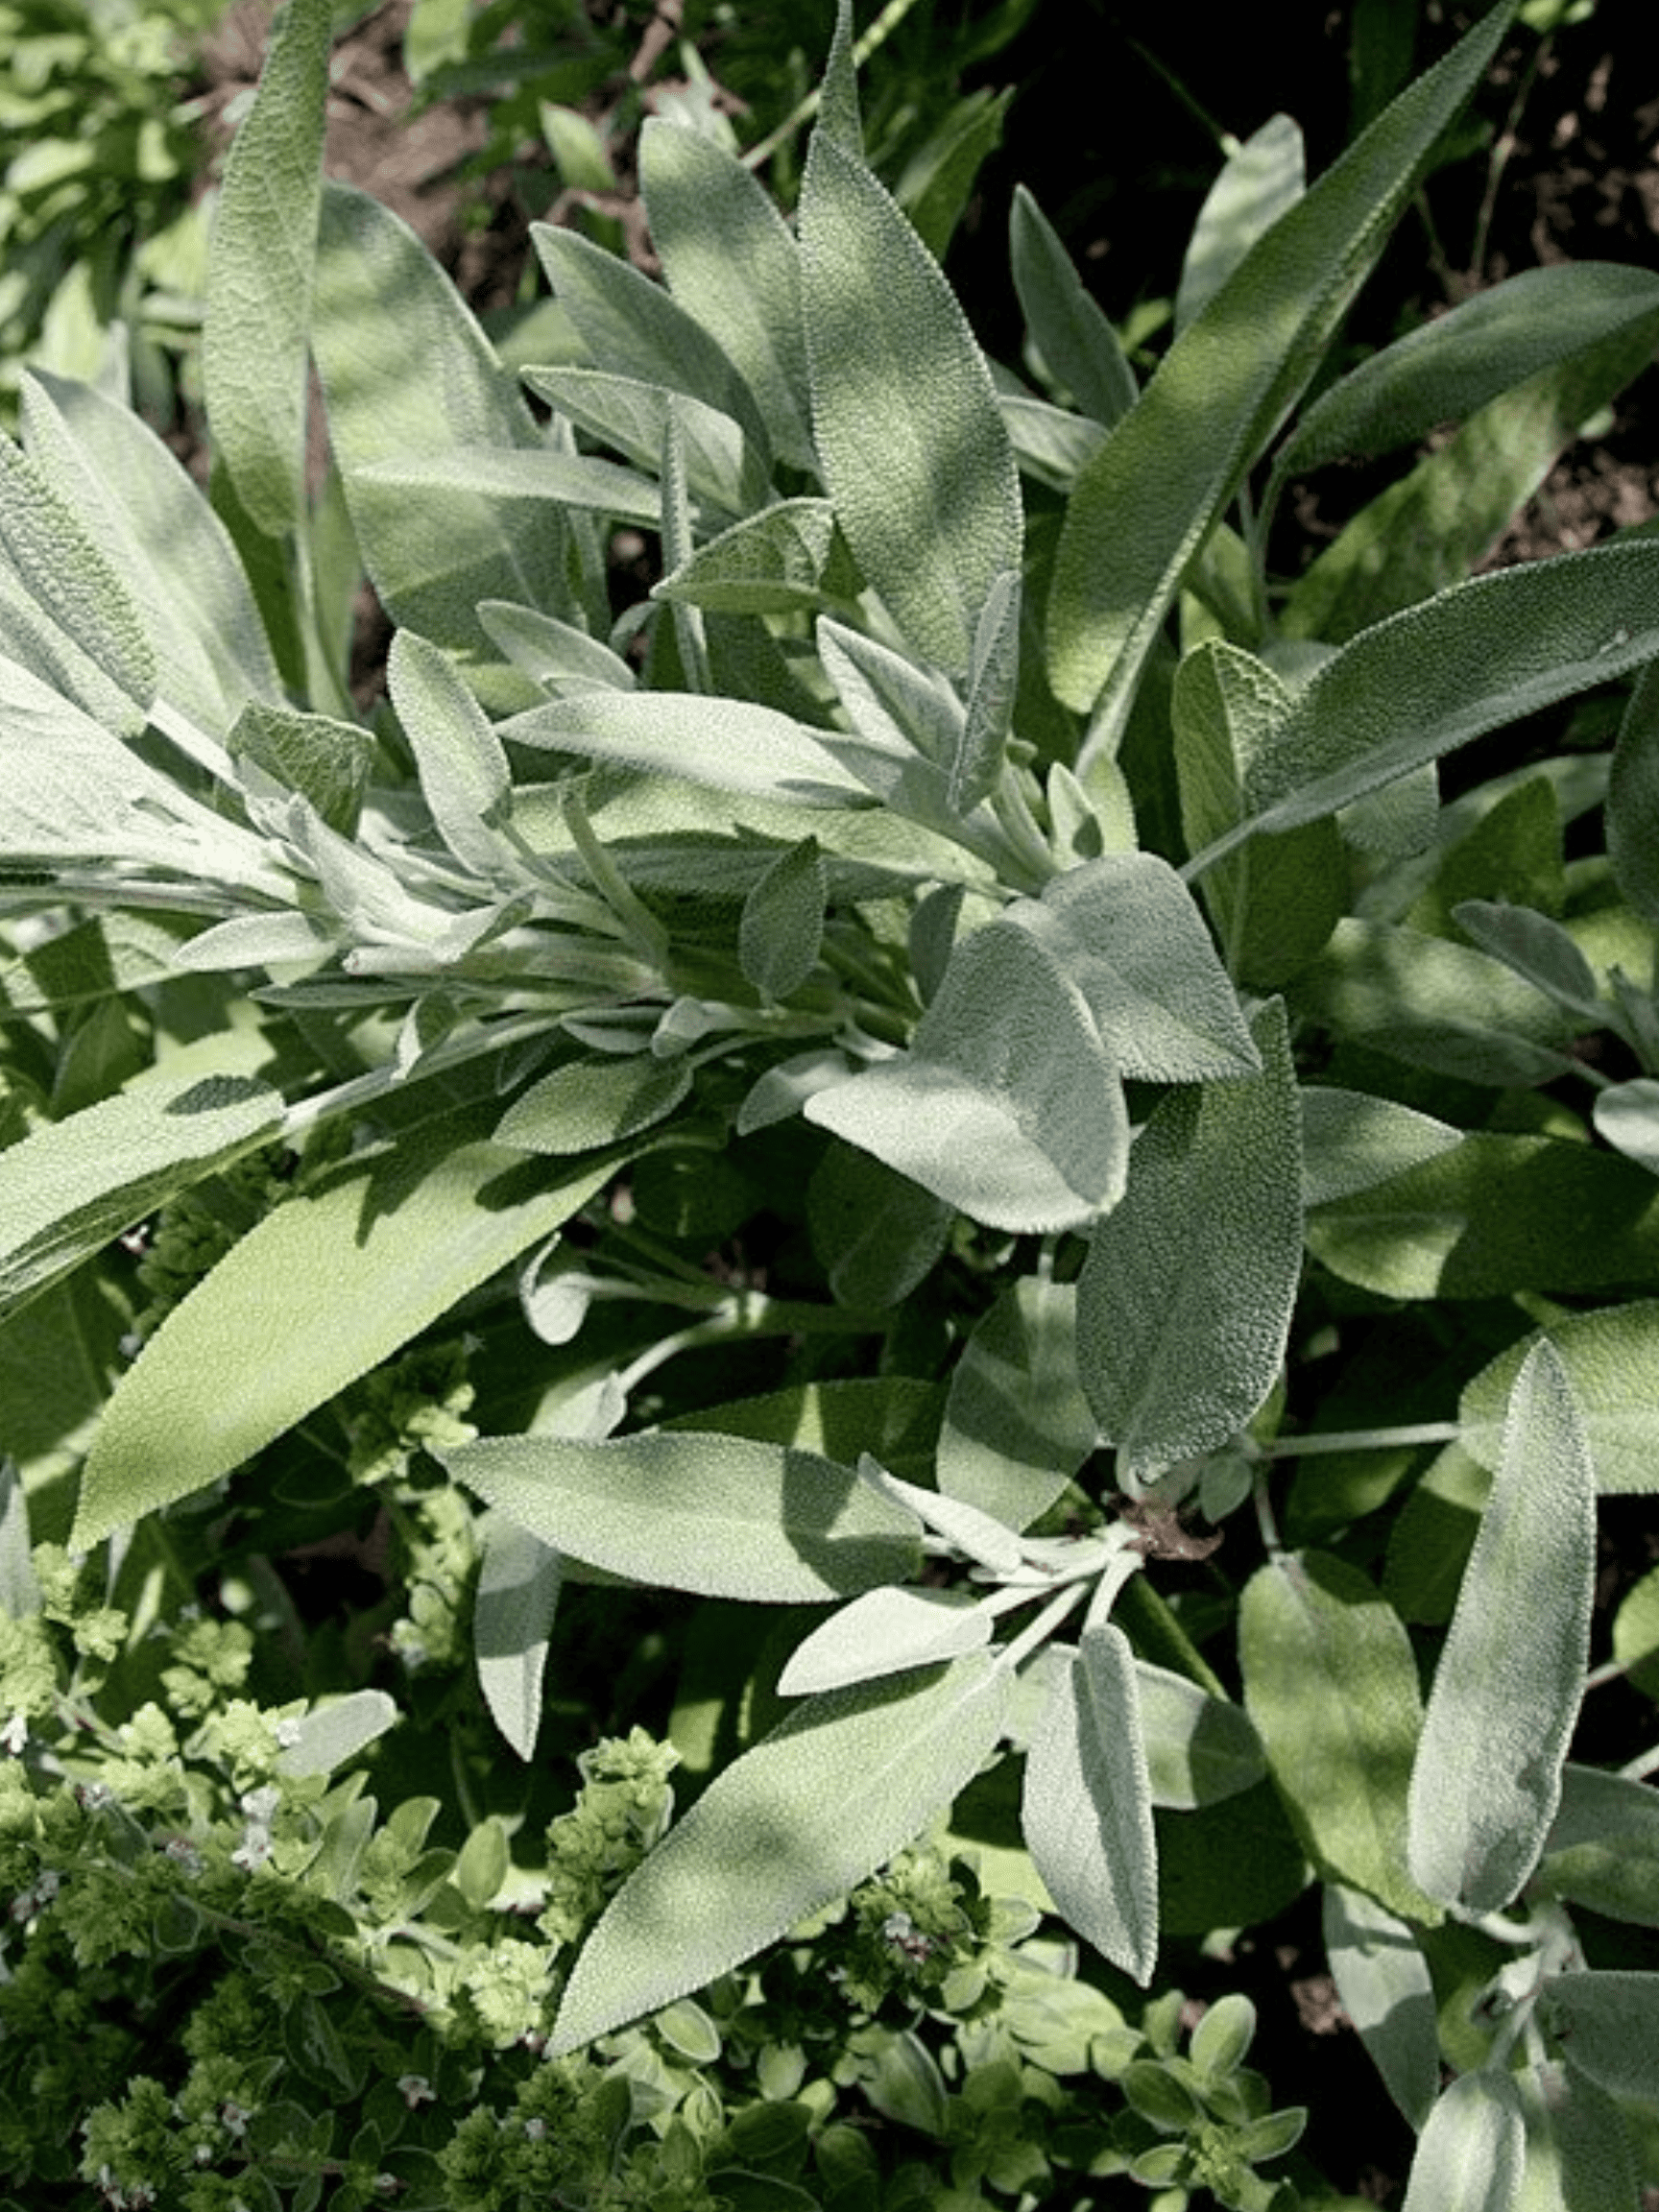 Sage plants with sun shining on the leaves.